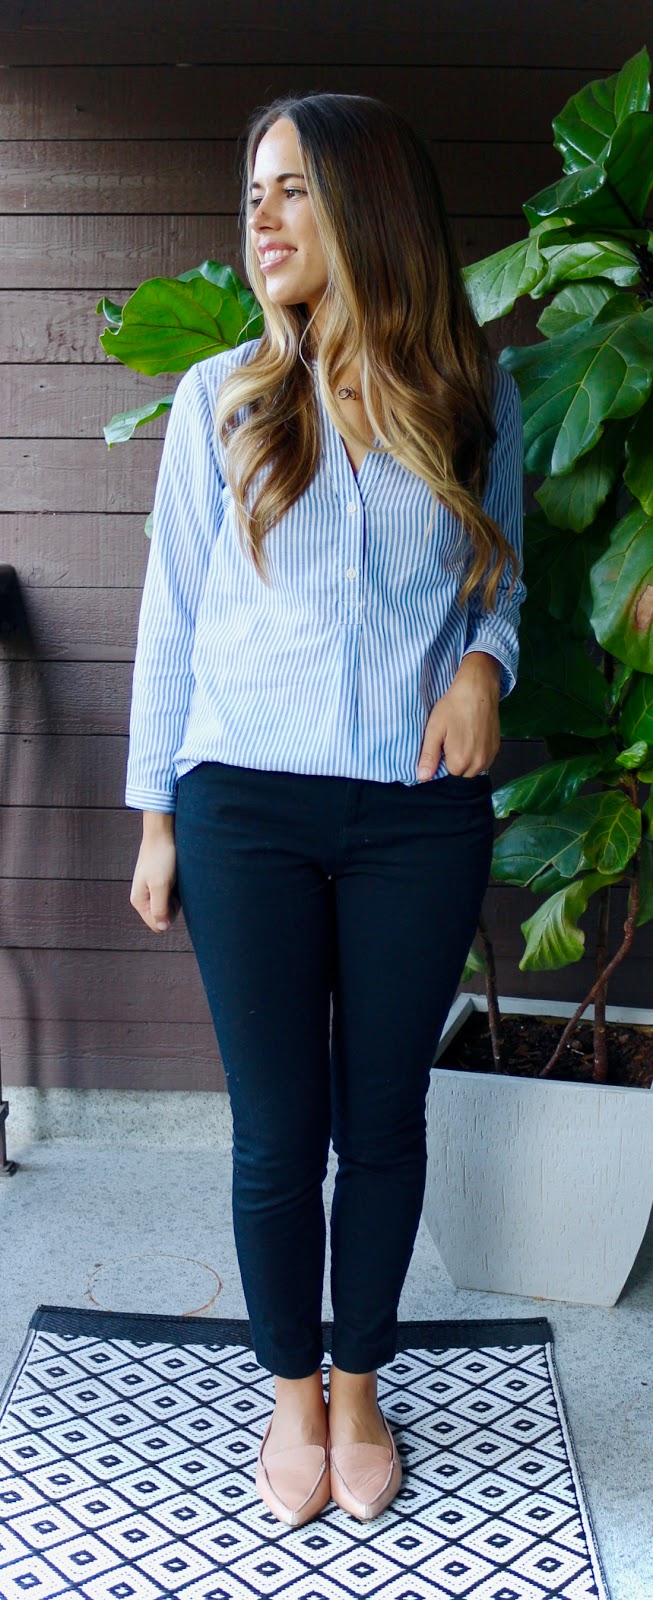 Jules in Flats - Striped Tunic Popover Top (Business Casual Fall Workwear on a Budget) 